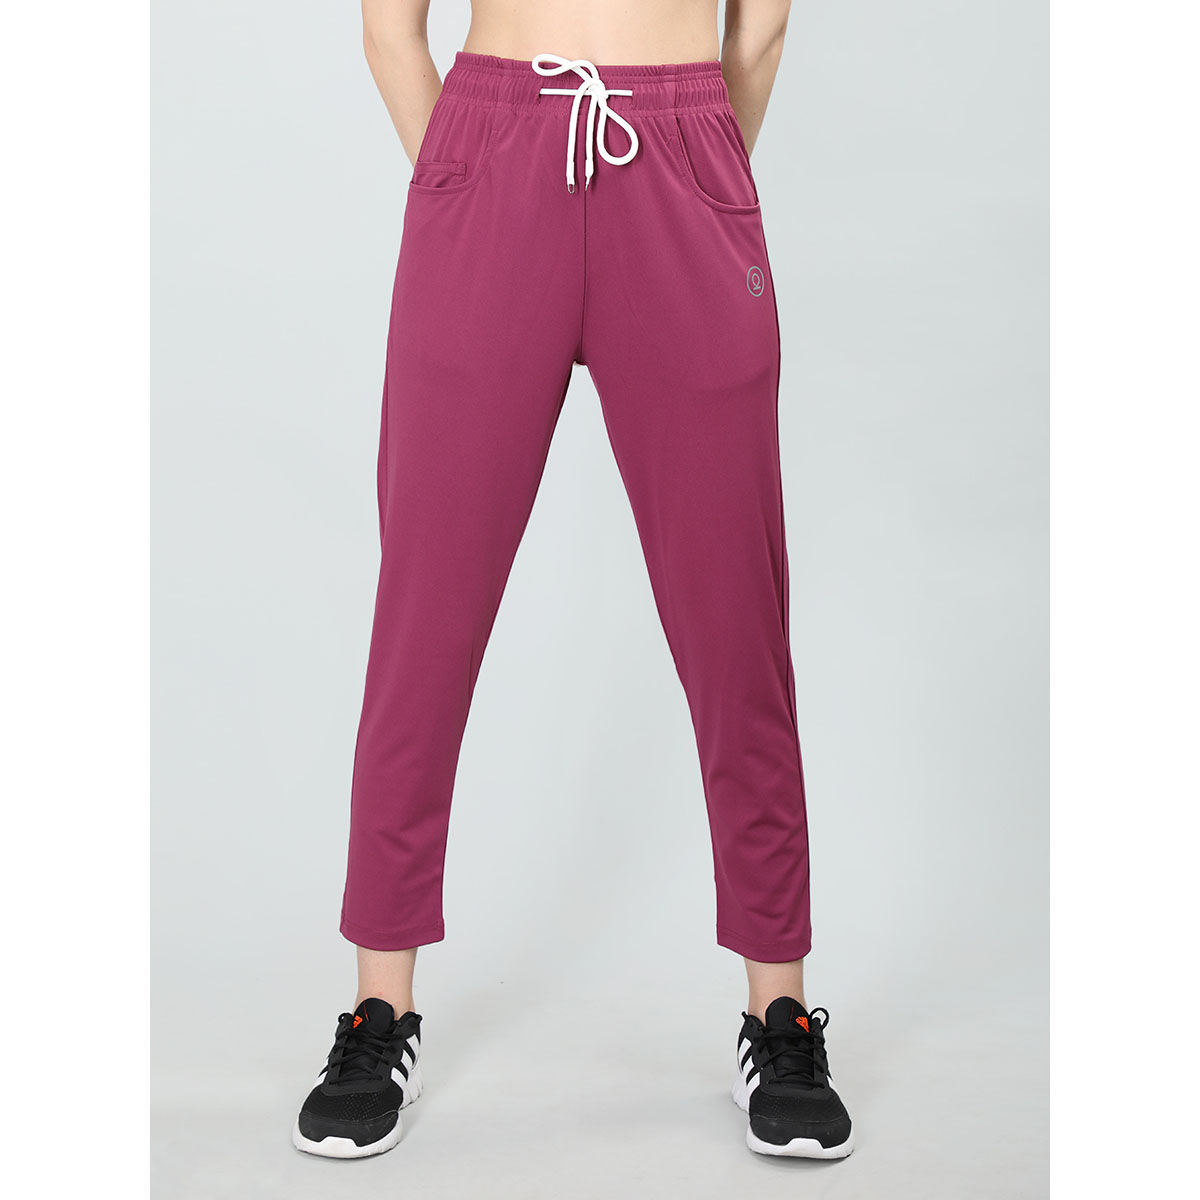 ALCiS Women Solid Regular Fit Training or Gym Track Pants Red : Amazon.in:  Clothing & Accessories